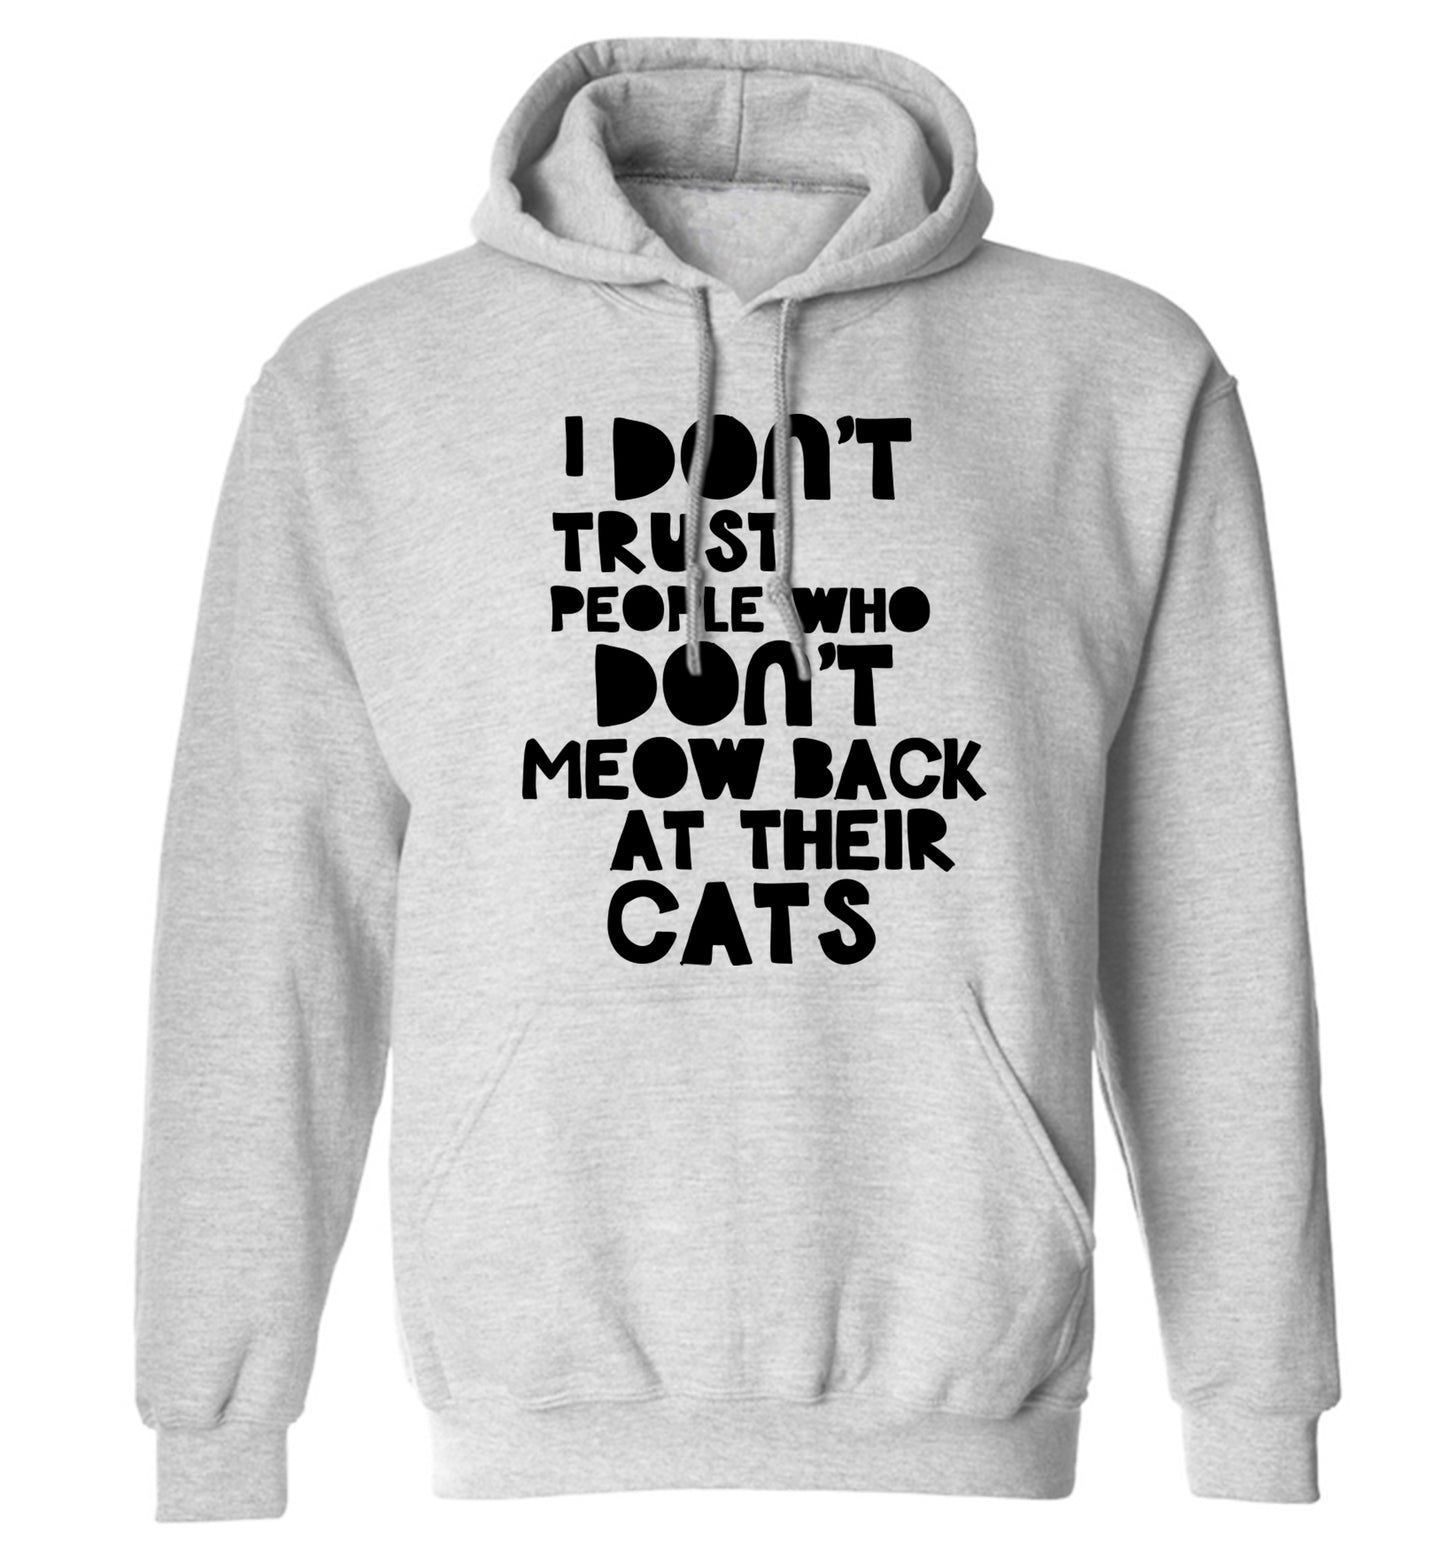 I don't trust people who don't meow back at their cats adults unisex grey hoodie 2XL